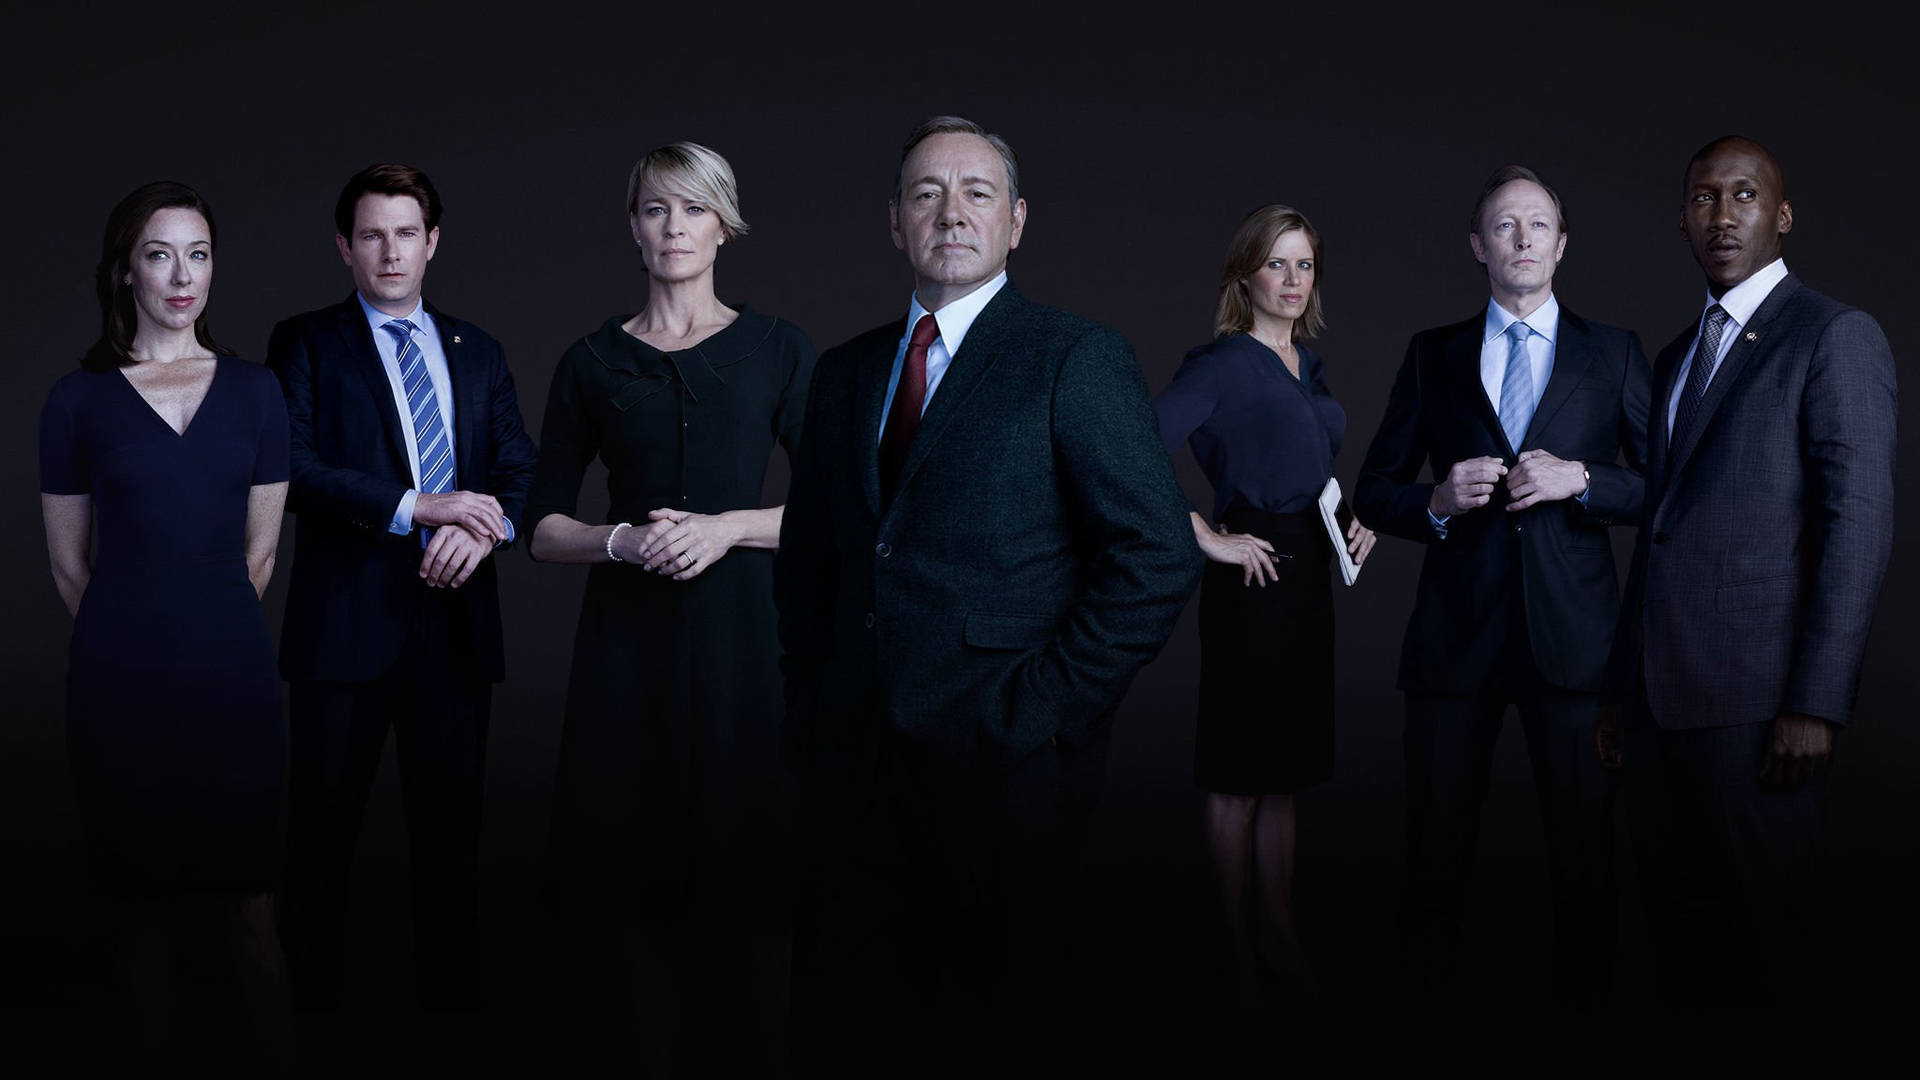 Leading Cast Of House Of Cards Wallpaper